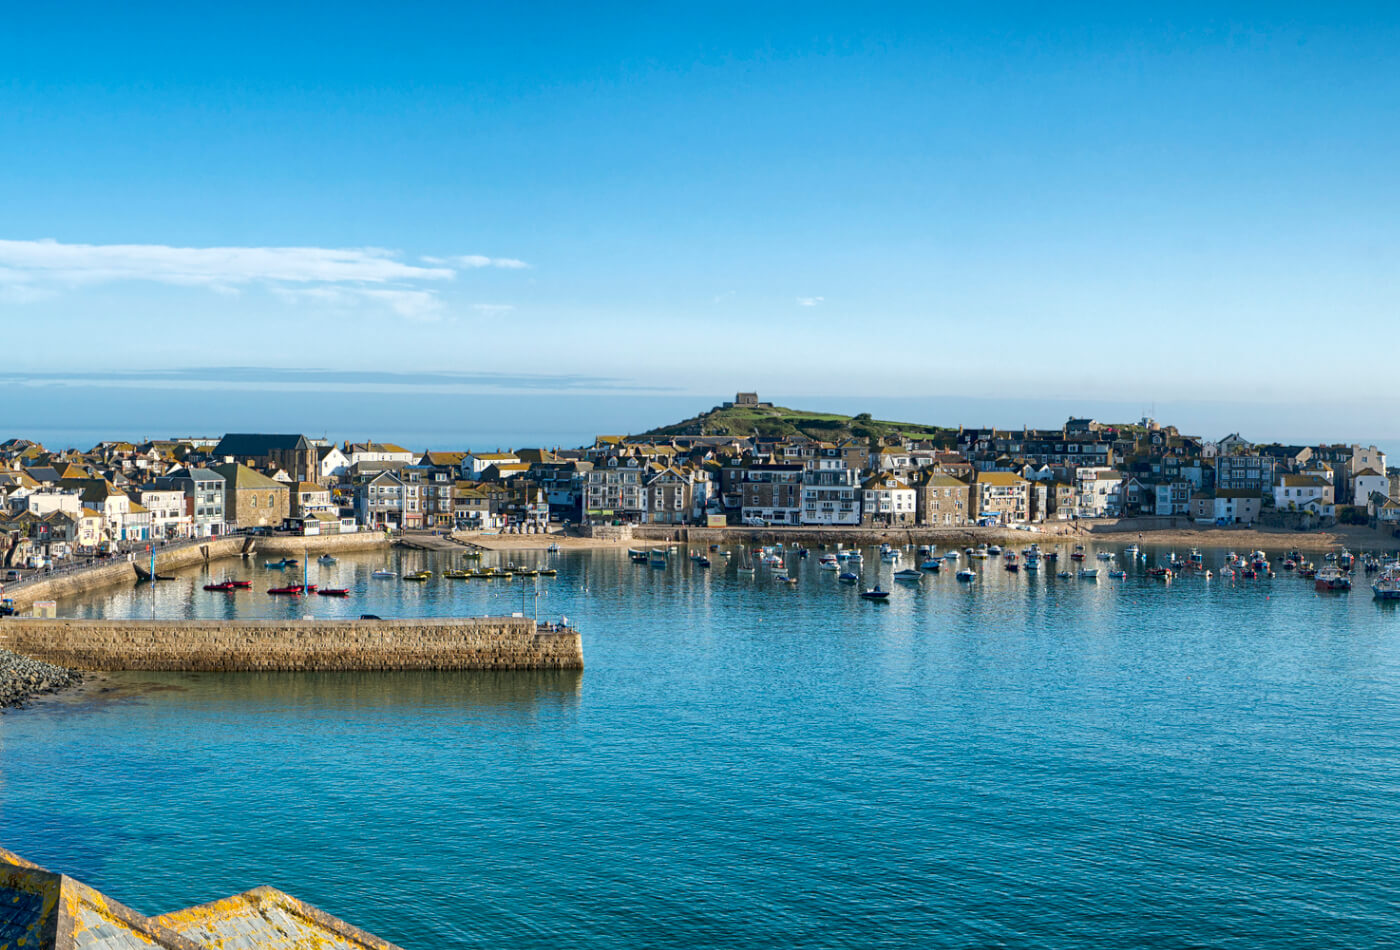 View of St Ives, Cornwall UK.